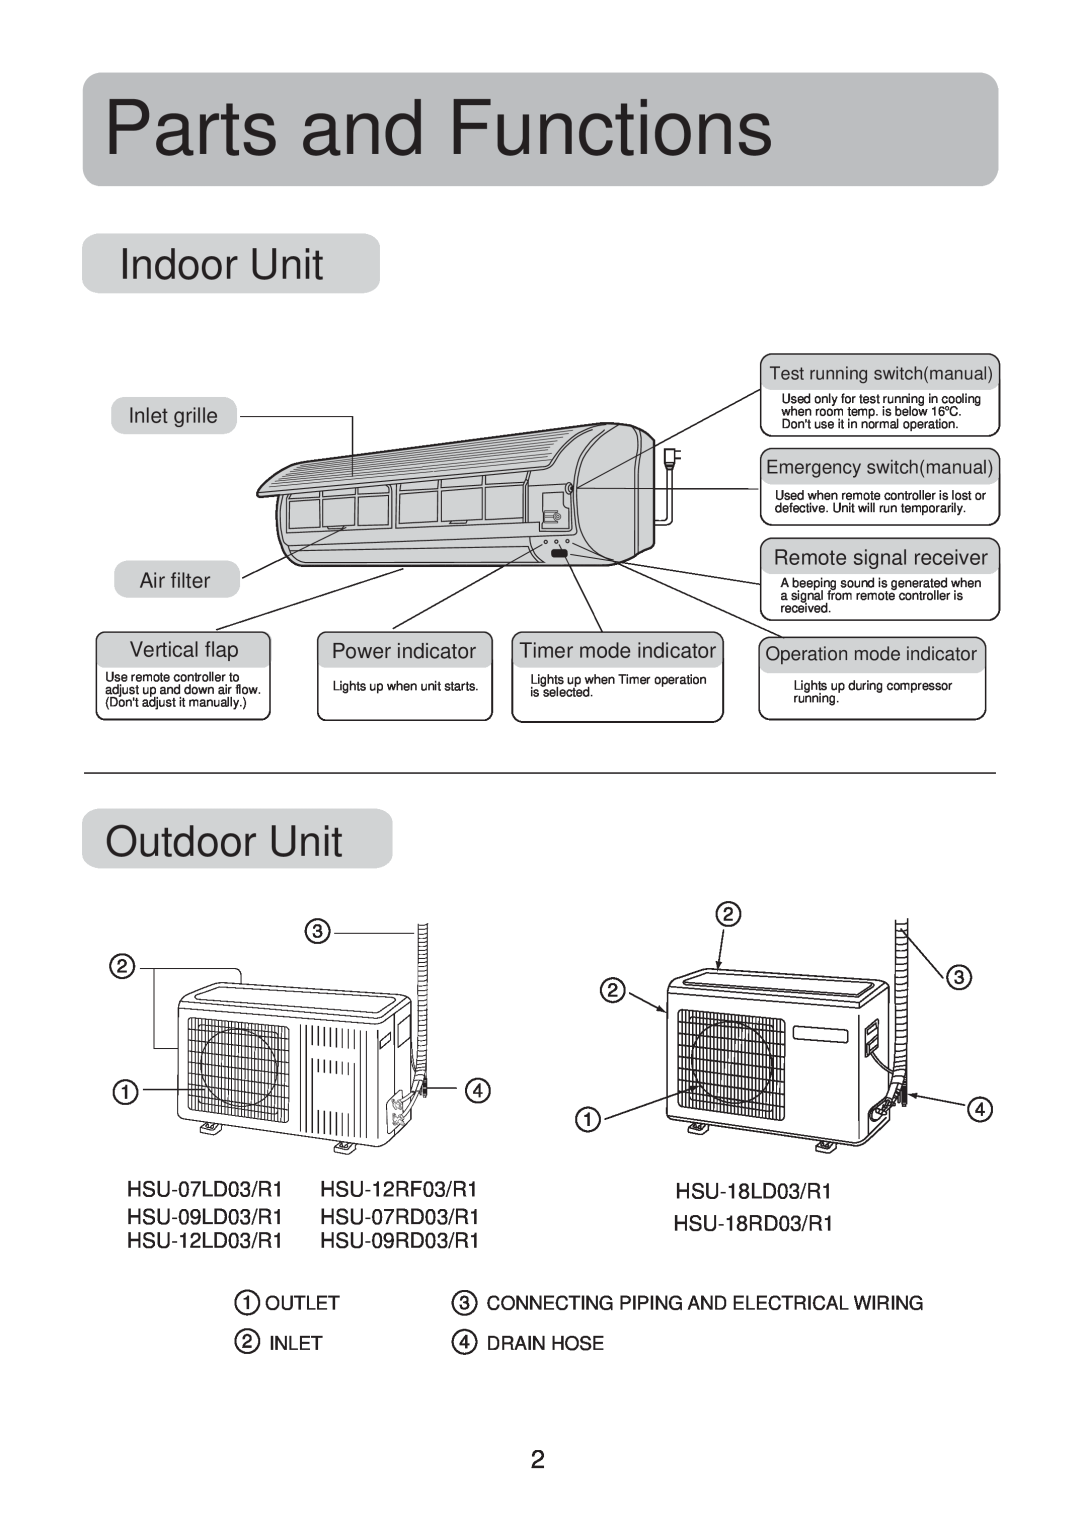 Haier No. 0010551809 Parts and Functions, Indoor Unit, Outdoor Unit, Outlet, Connecting Piping And Electrical Wiring 